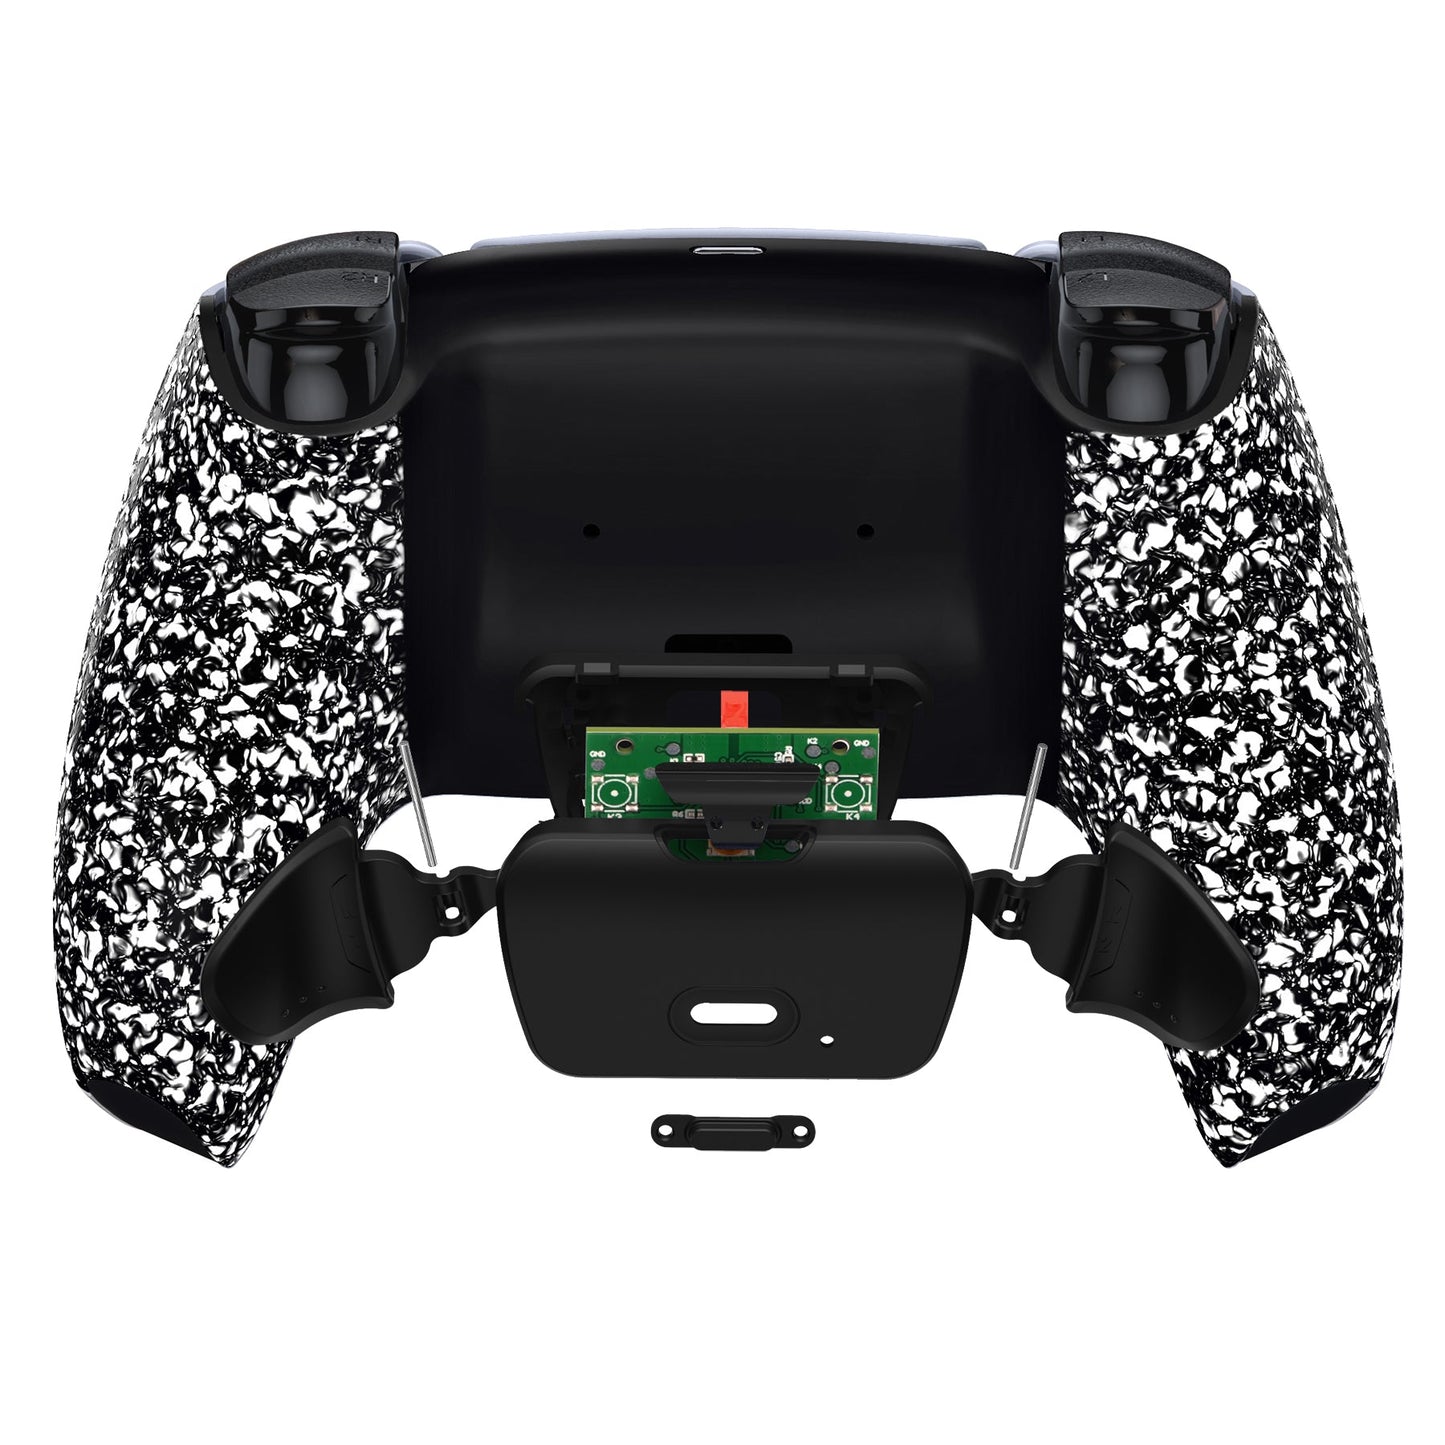 eXtremeRate Retail Textured White Back Paddles Remappable Rise Remap Kit with Upgrade Board & Redesigned Back Shell & Back Buttons Attachment for ps5 Controller BDM-010 & BDM-020 - XPFP3041G2